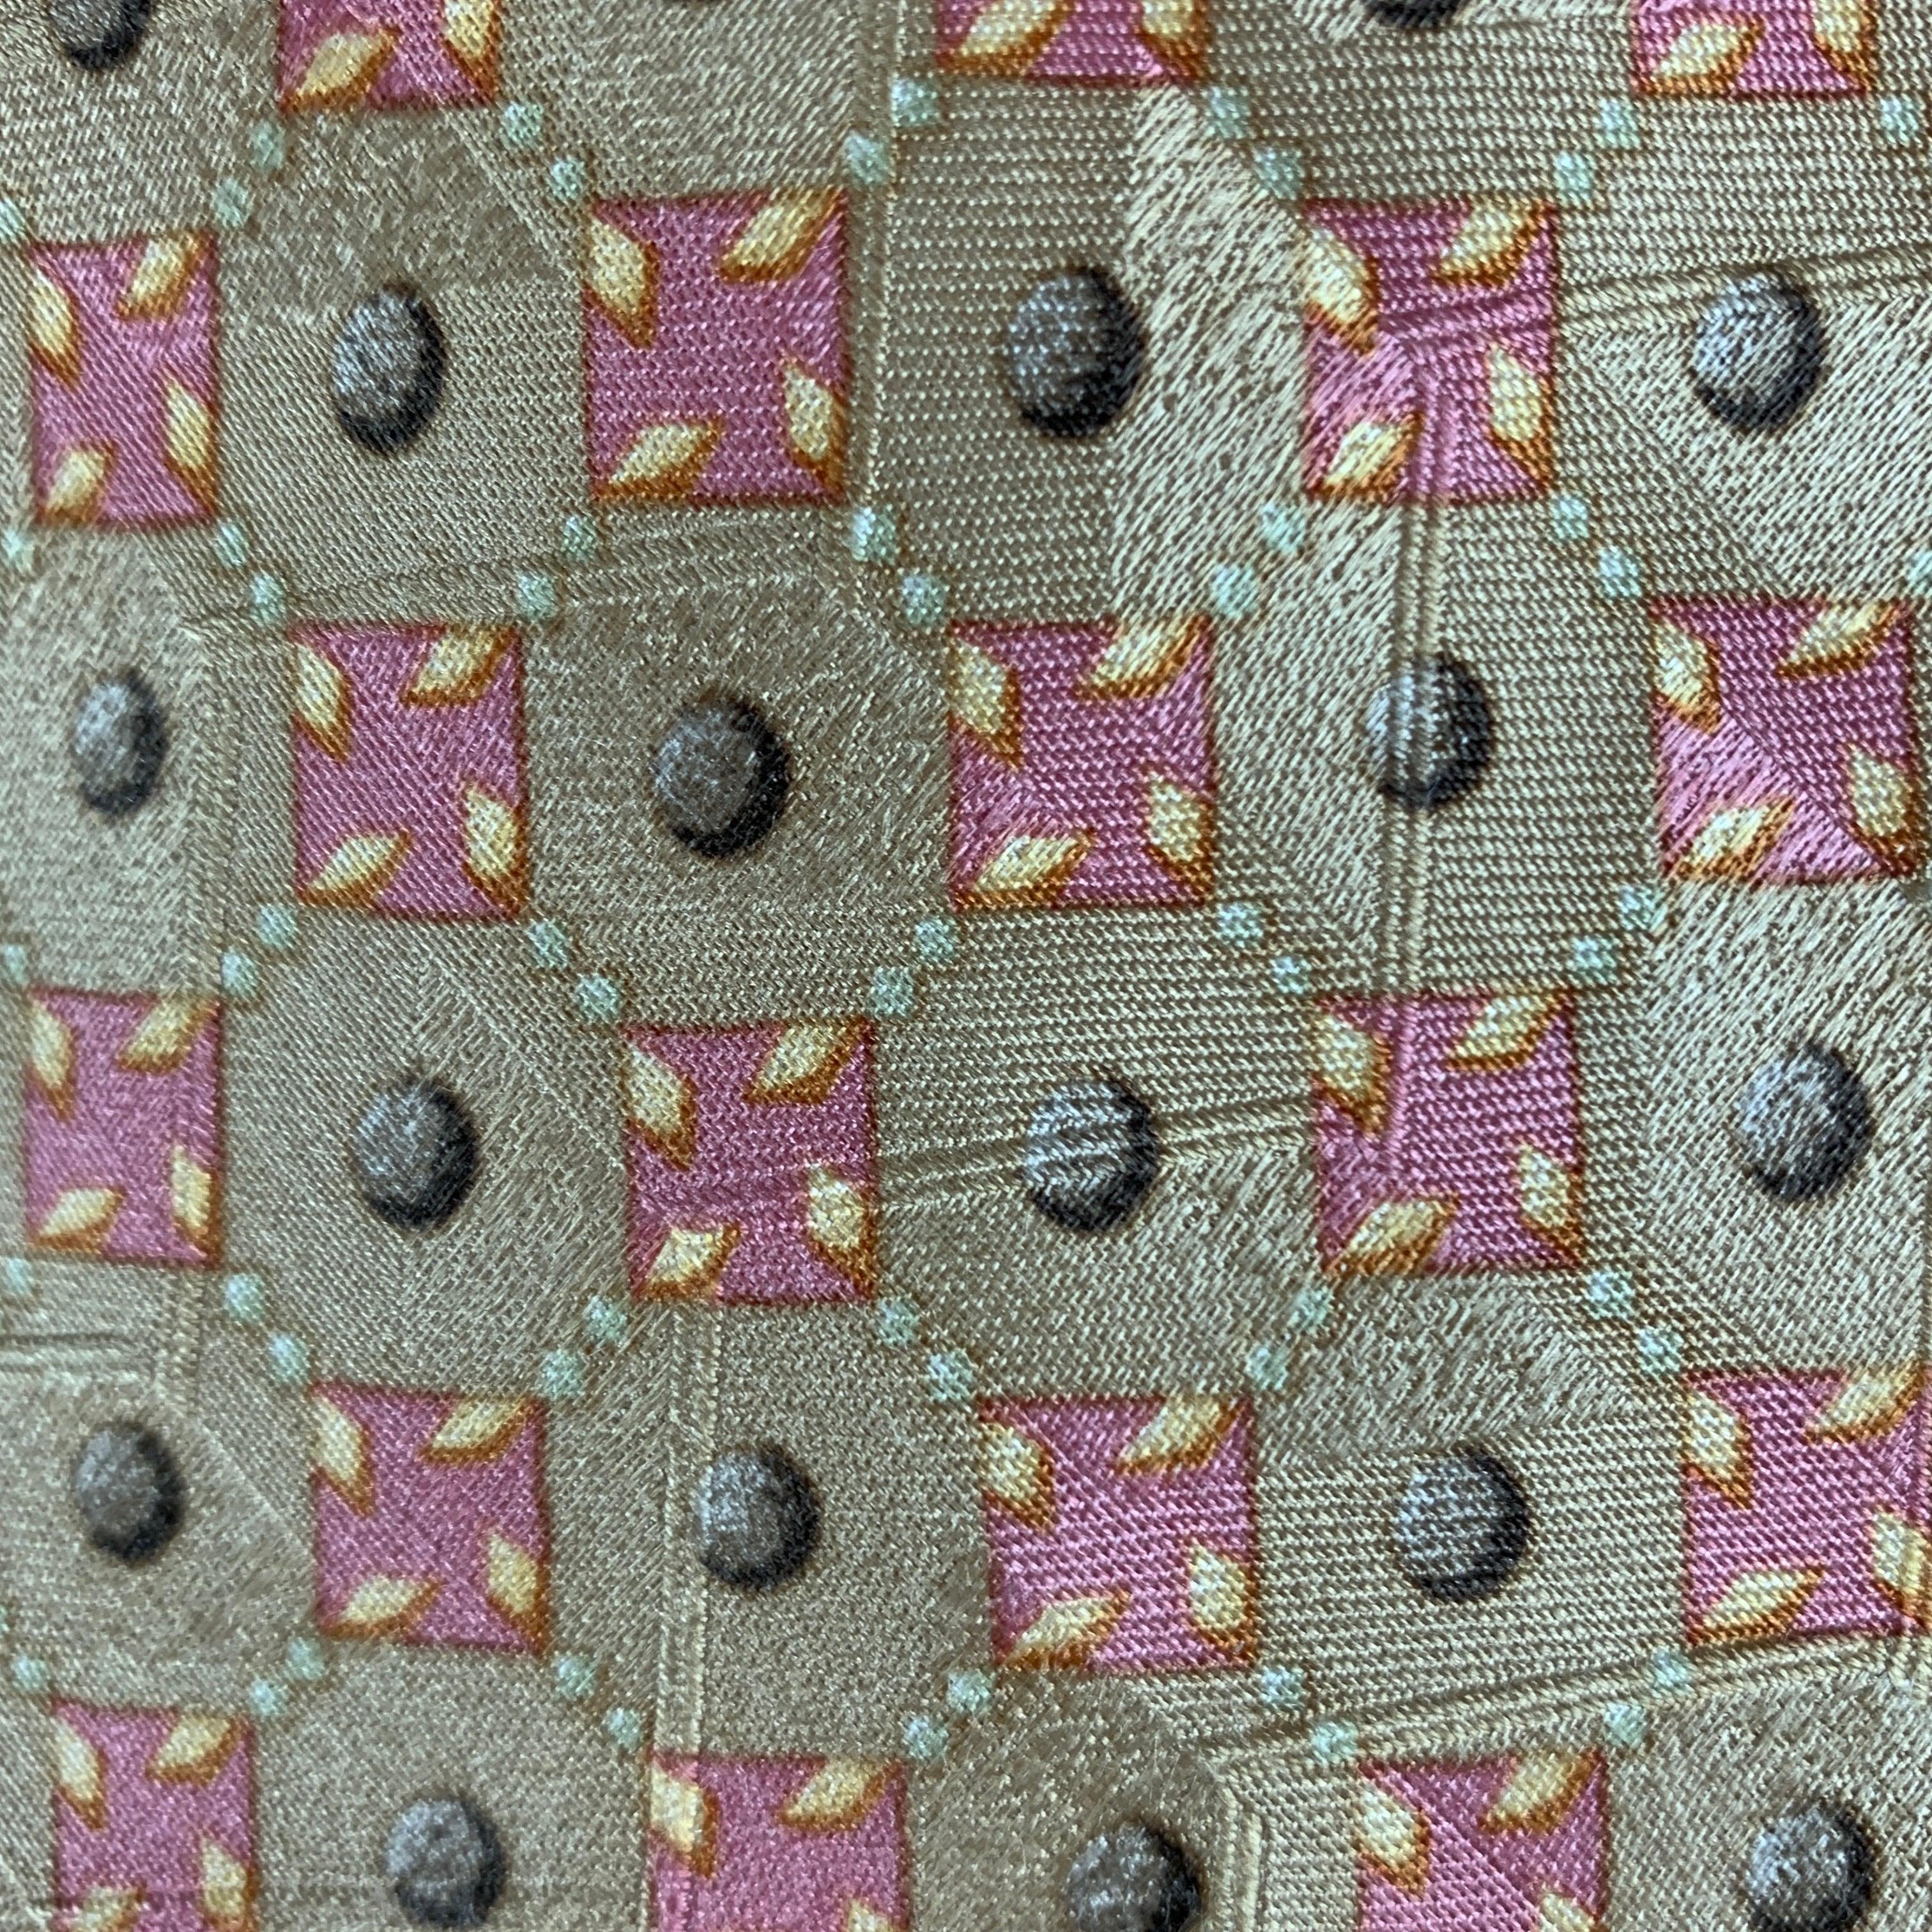 ERMENEGILDO ZEGNA necktie comes in beige featuring a pink rhombus pattern. 100% silk. Made in Italy.
Very Good Pre-Owned Condition.
 

Measurements: 
  Width: 3 inches Length: 60 inches 




  
  
 
Reference: 124769
Category: Tie
More Details
   